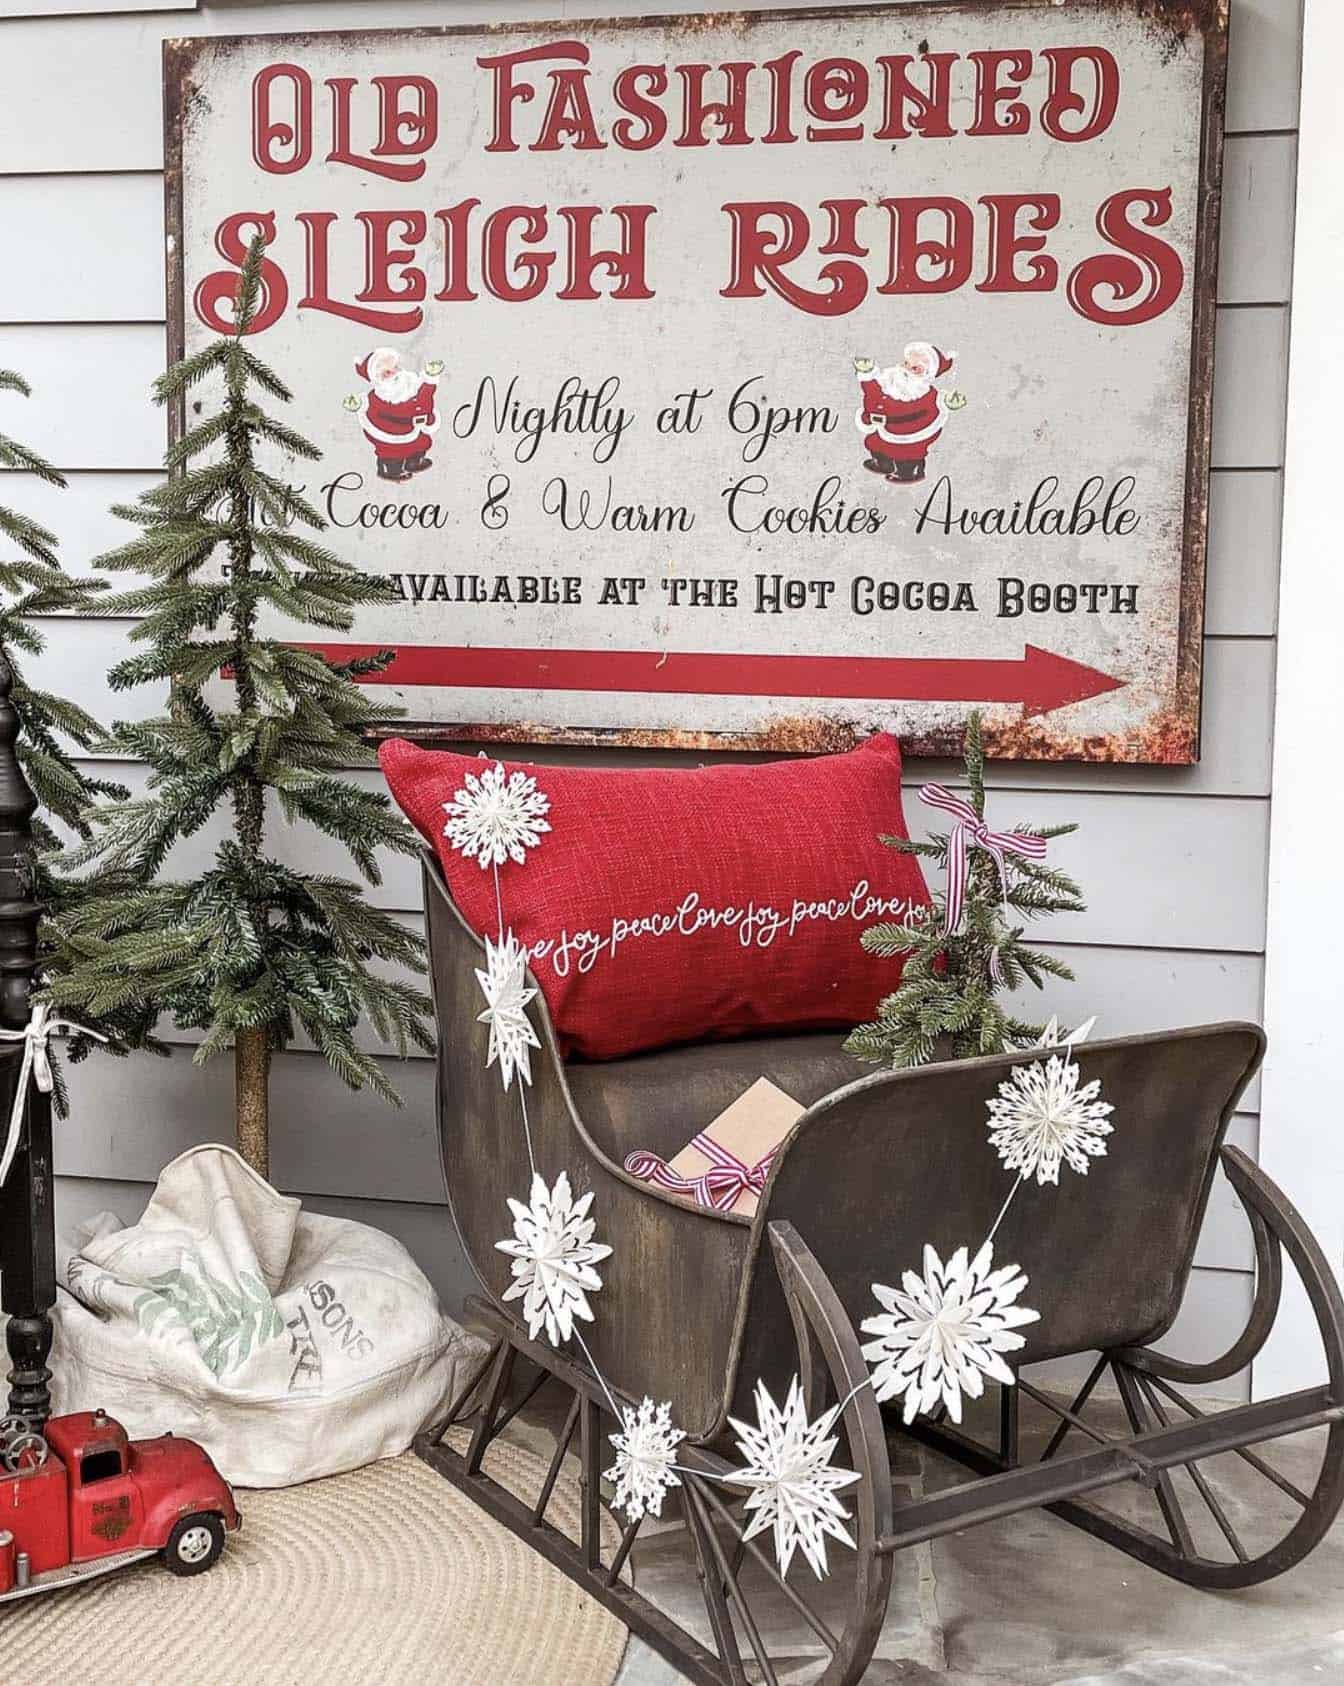 vintage style Christmas front porch decor with a sleigh and sign